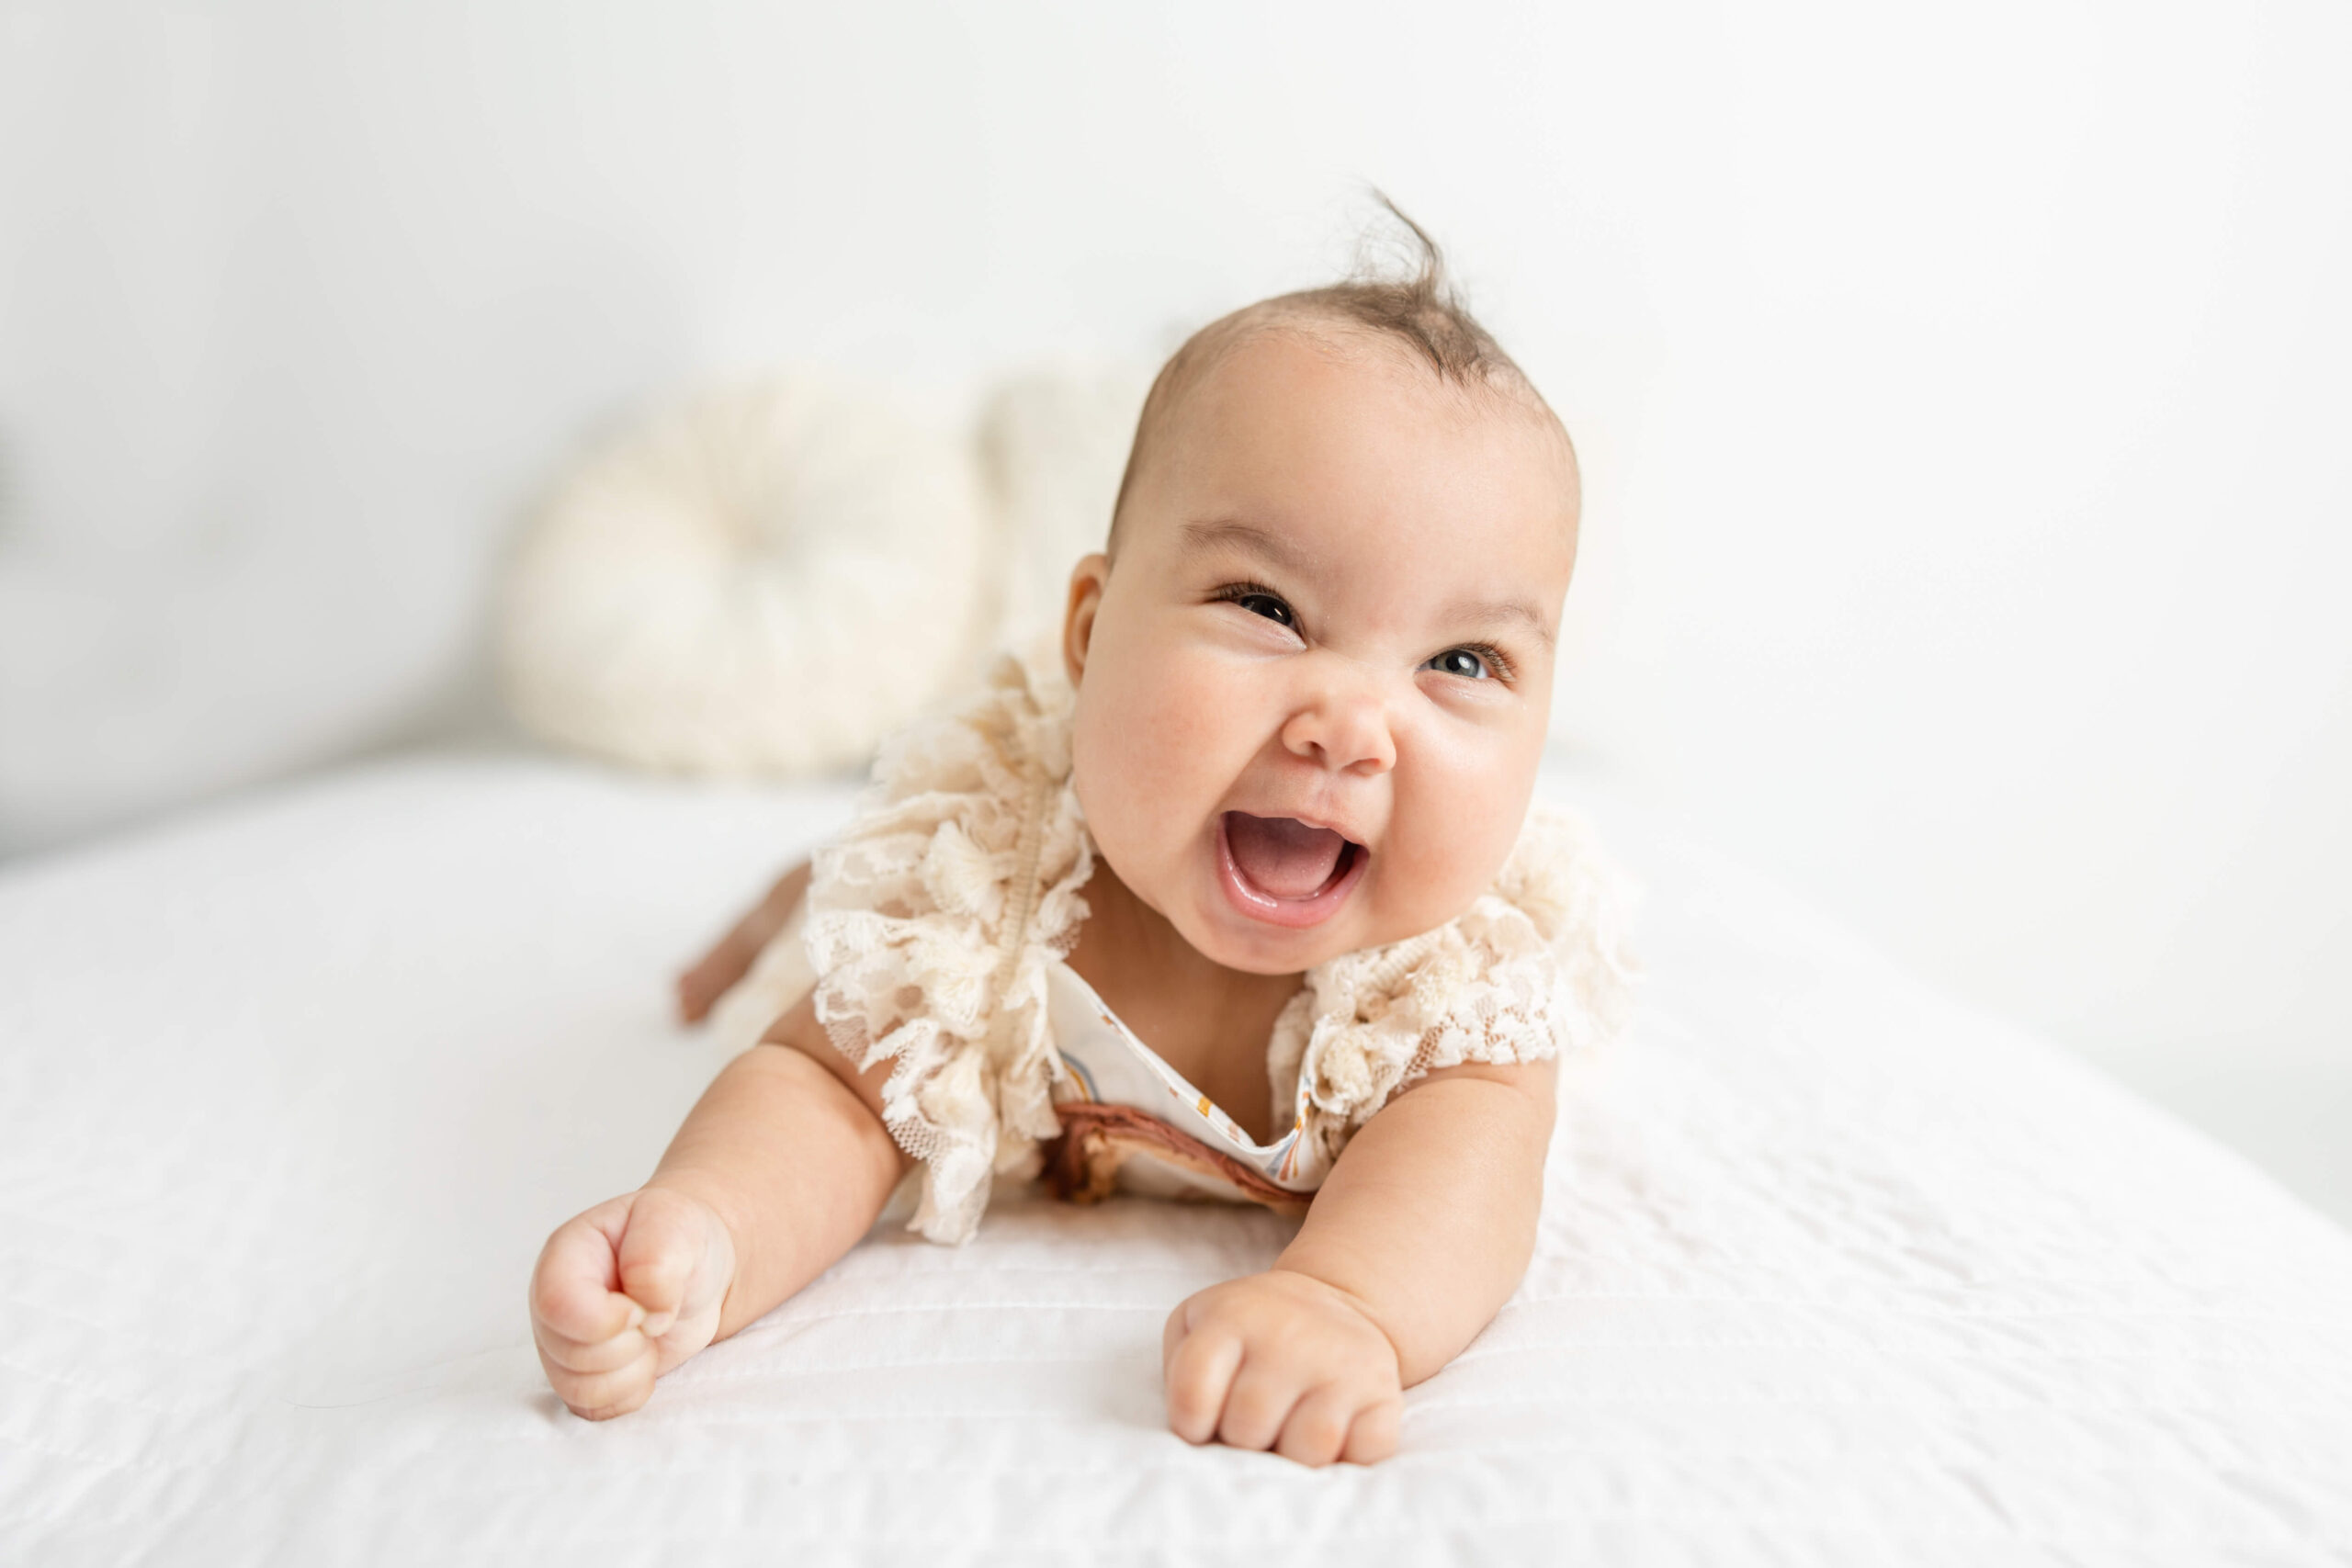 One happy little girl showing her smiles during her in studio motherhood session with Molly Berry Photography.